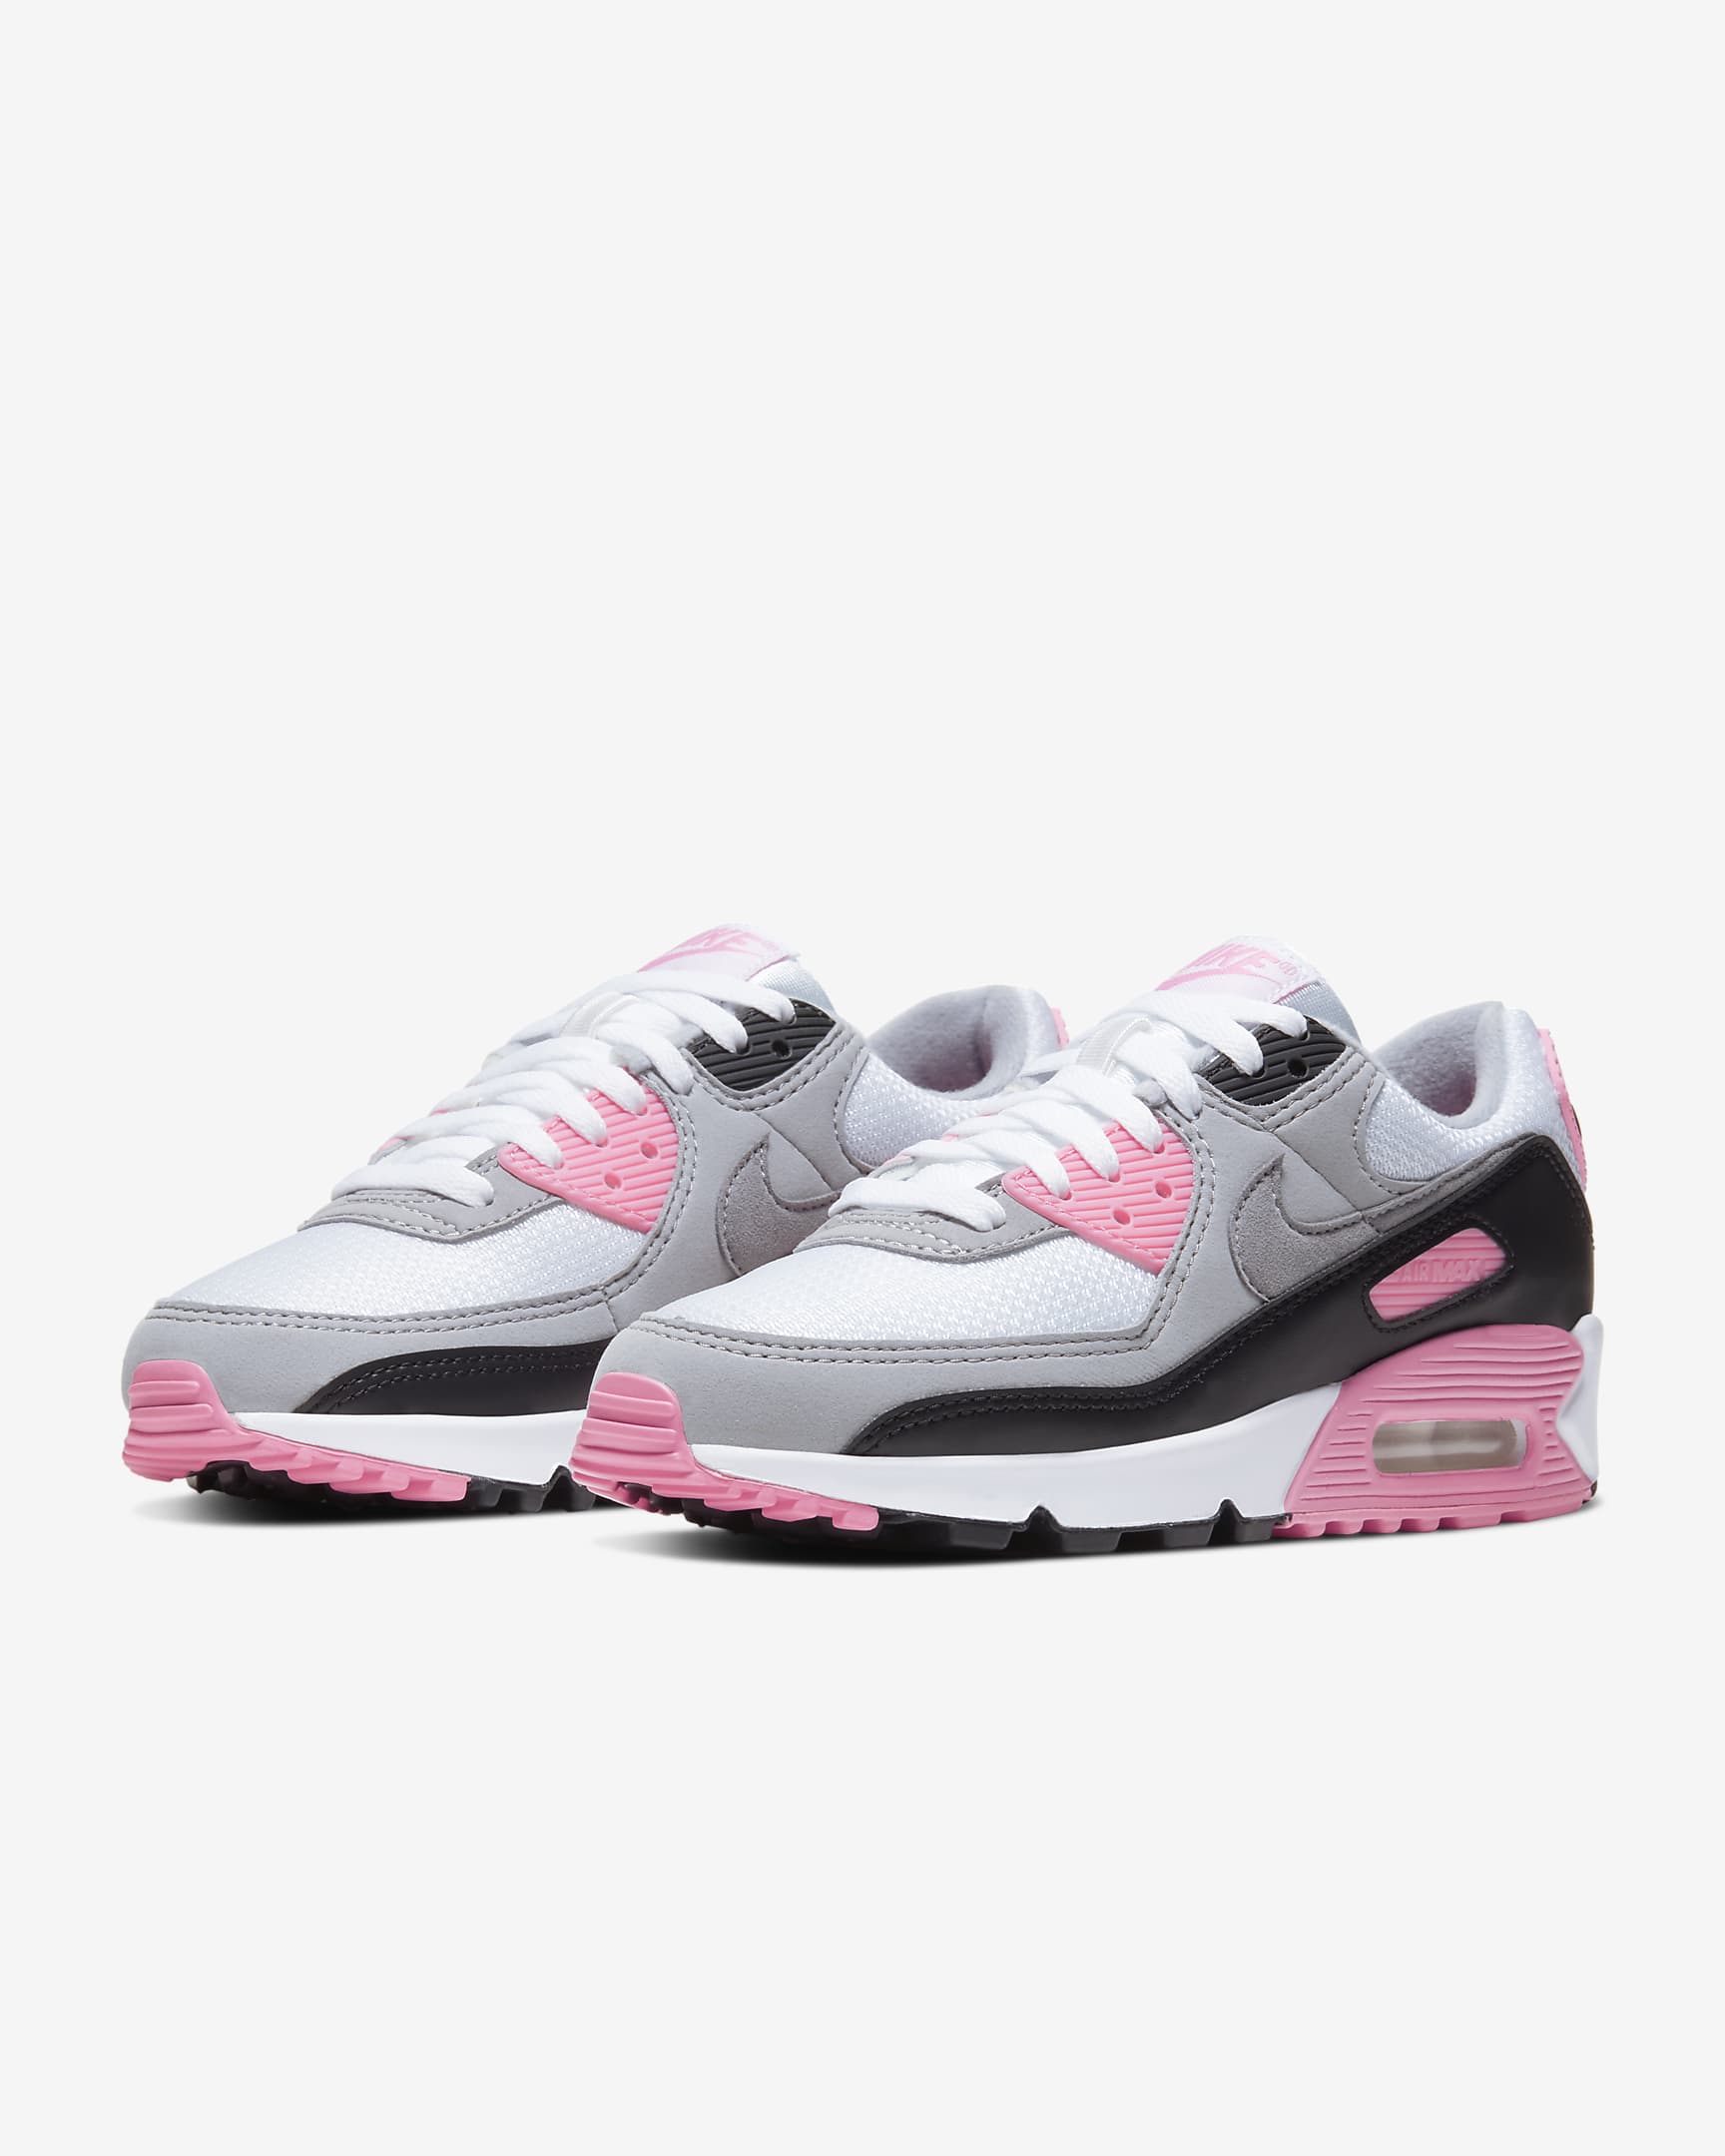 Nike Air Max 90 Women's Shoes - White/Rose/Black/Particle Grey